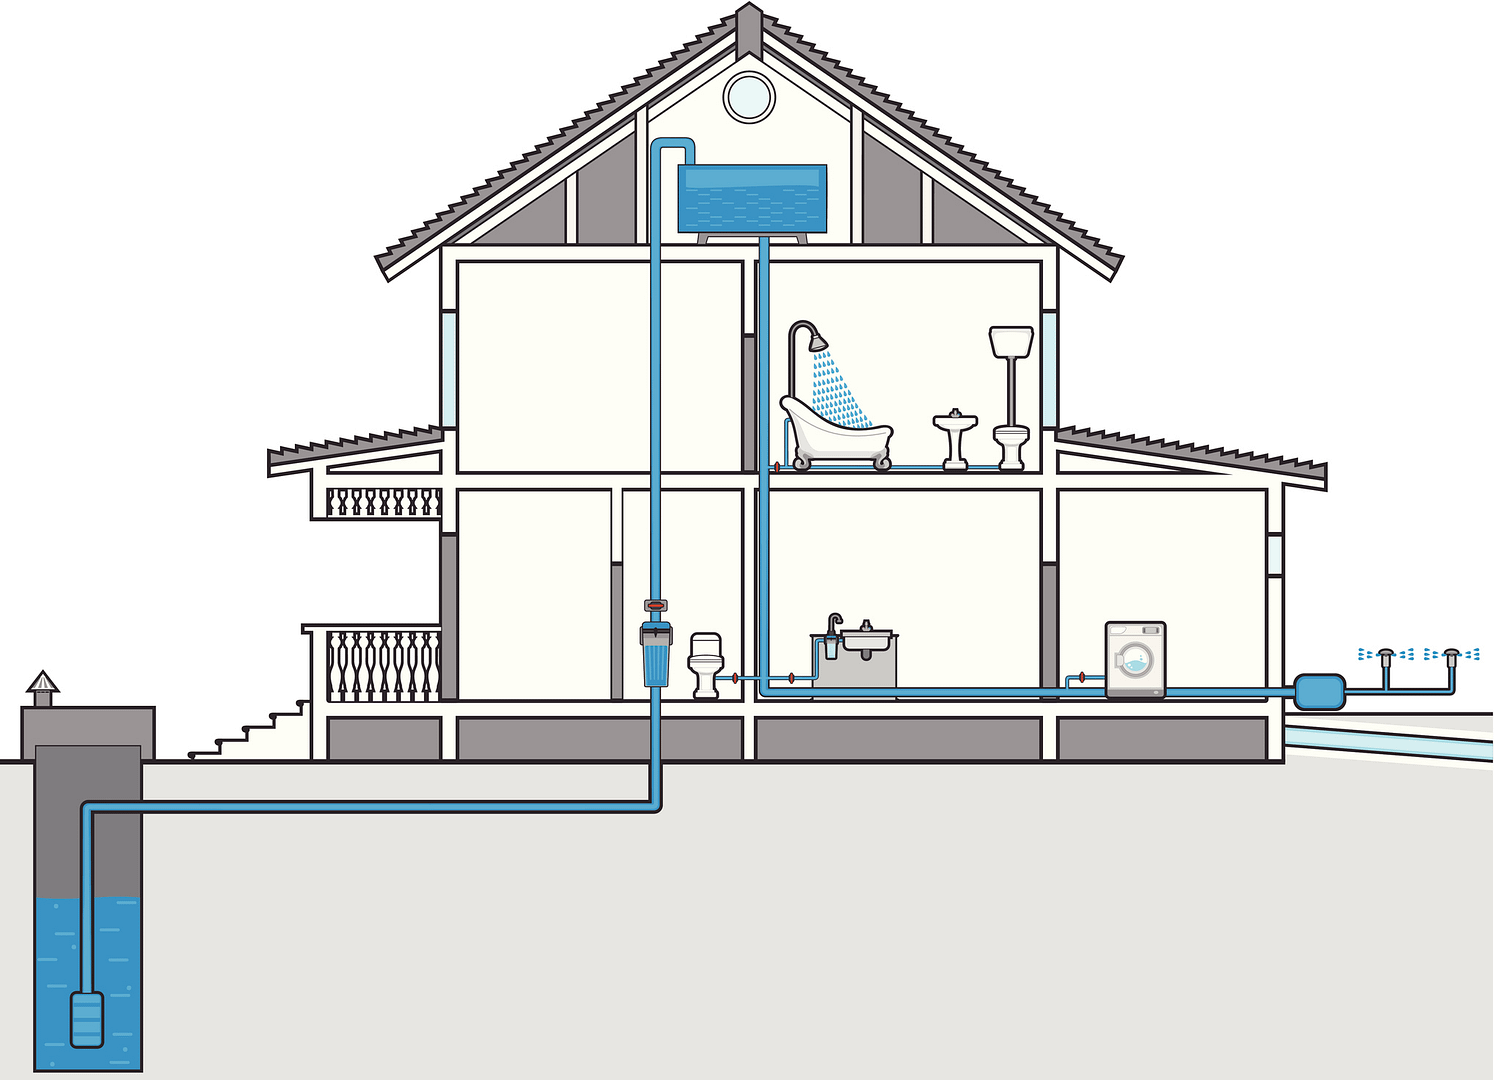 Plumbing Plan for a House in Riverside CA